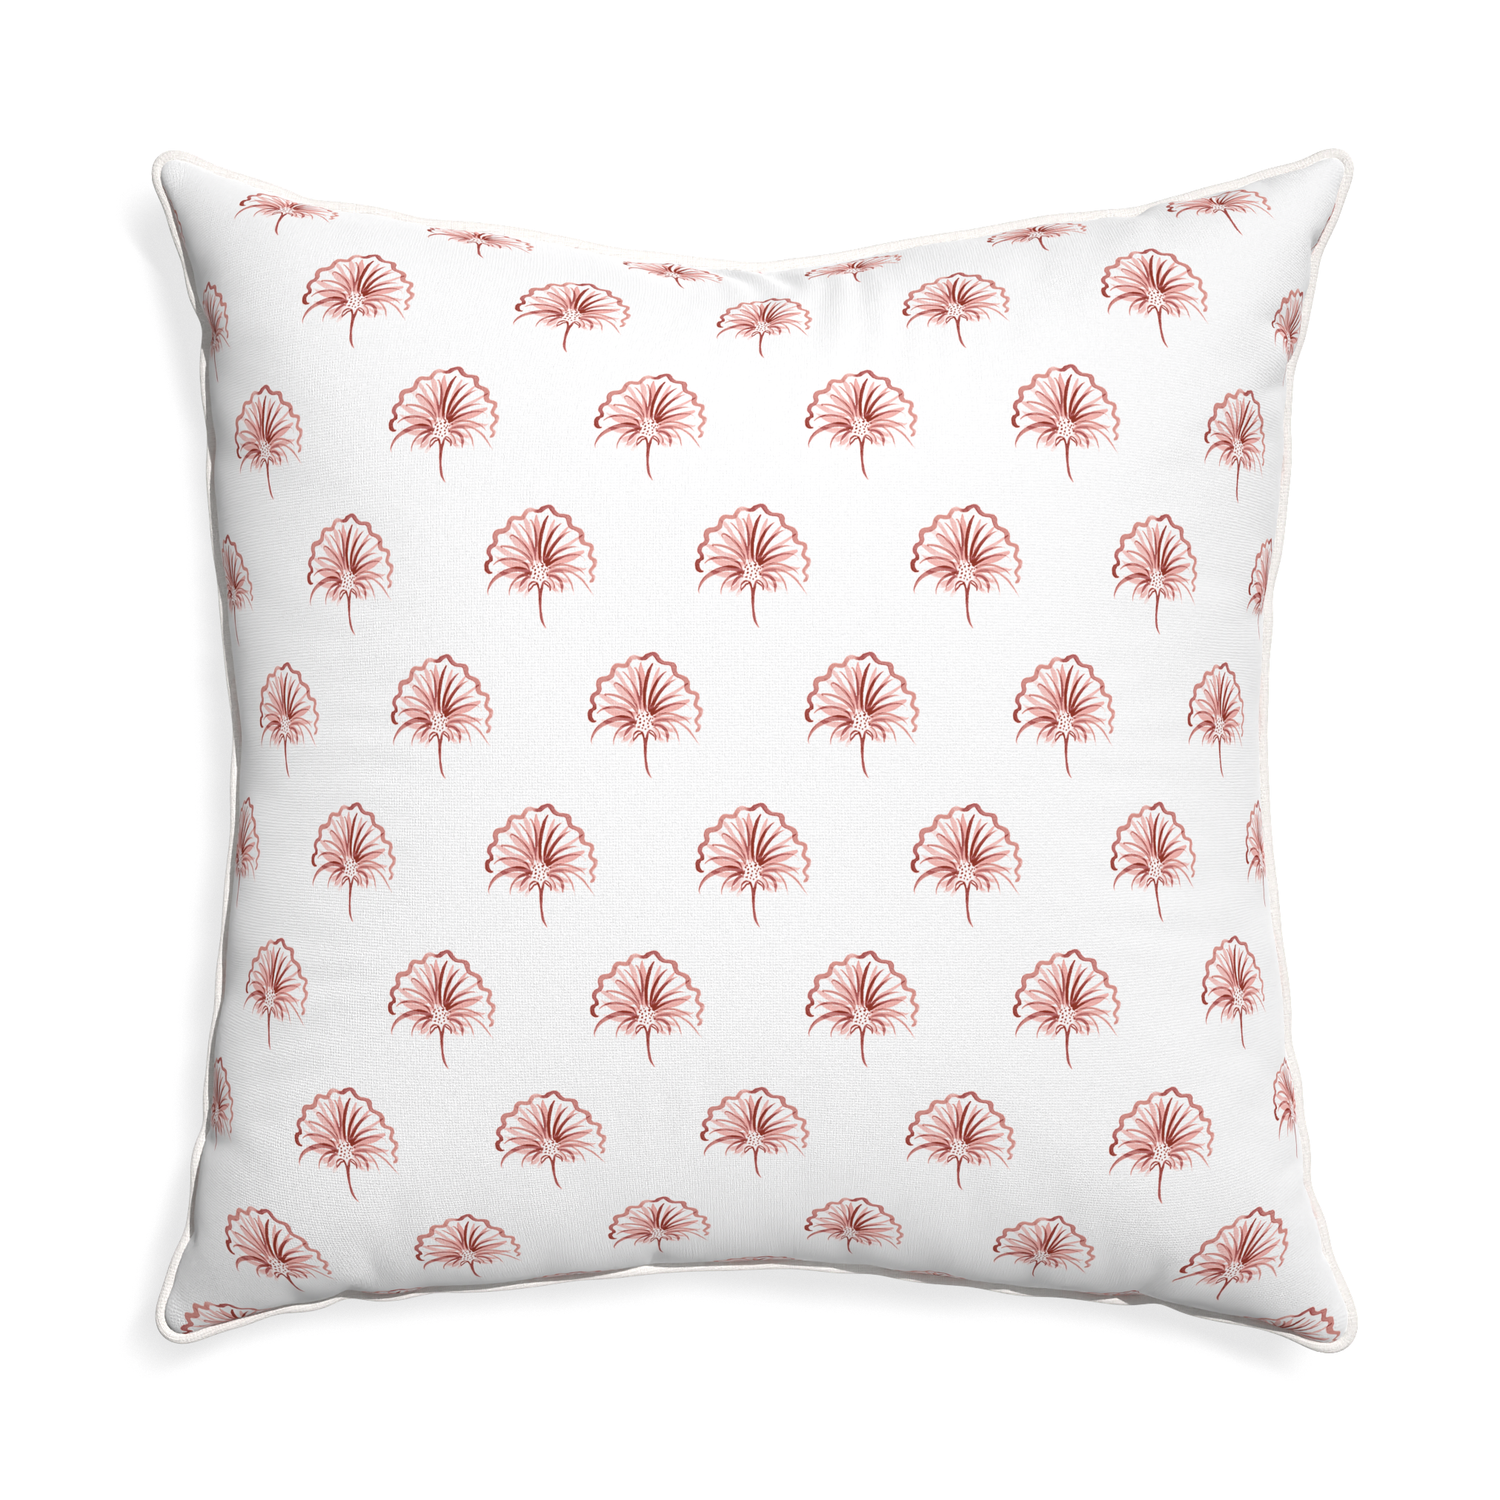 Euro-sham penelope rose custom floral pinkpillow with snow piping on white background